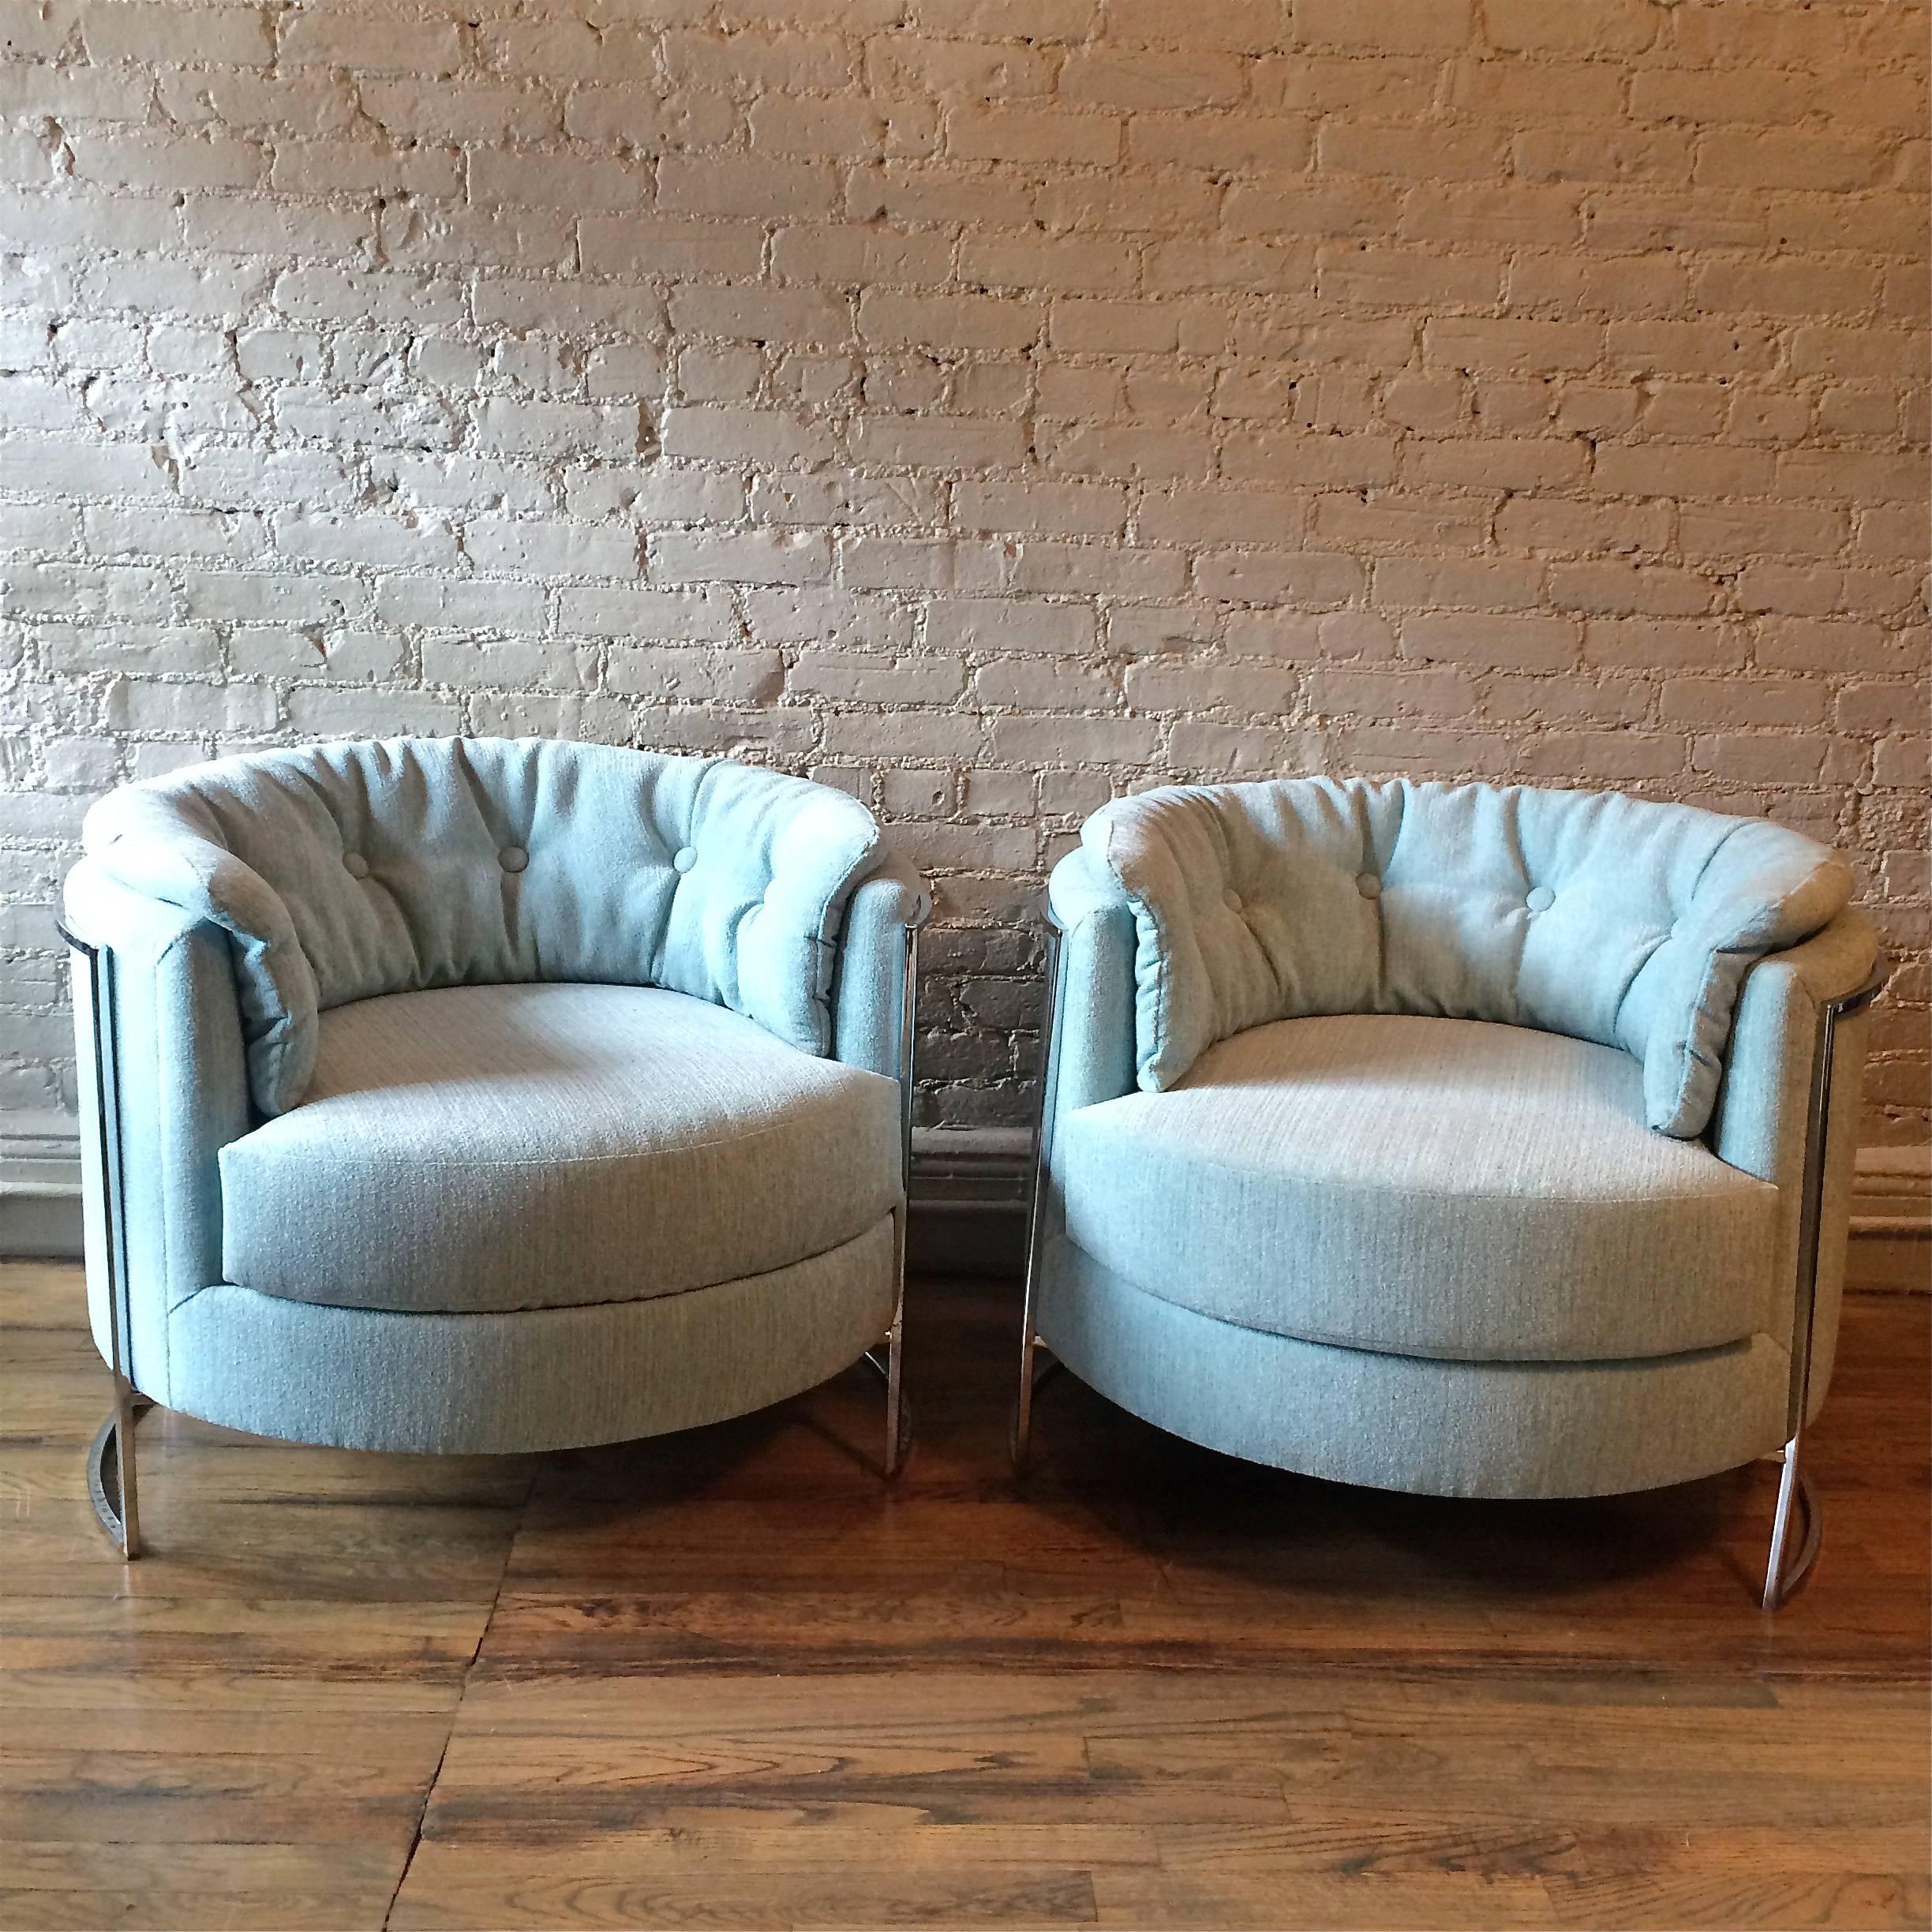 Pair of incredible, barrel shape, club, lounge chairs with minimal chrome frames are newly upholstered in light blue chenille.